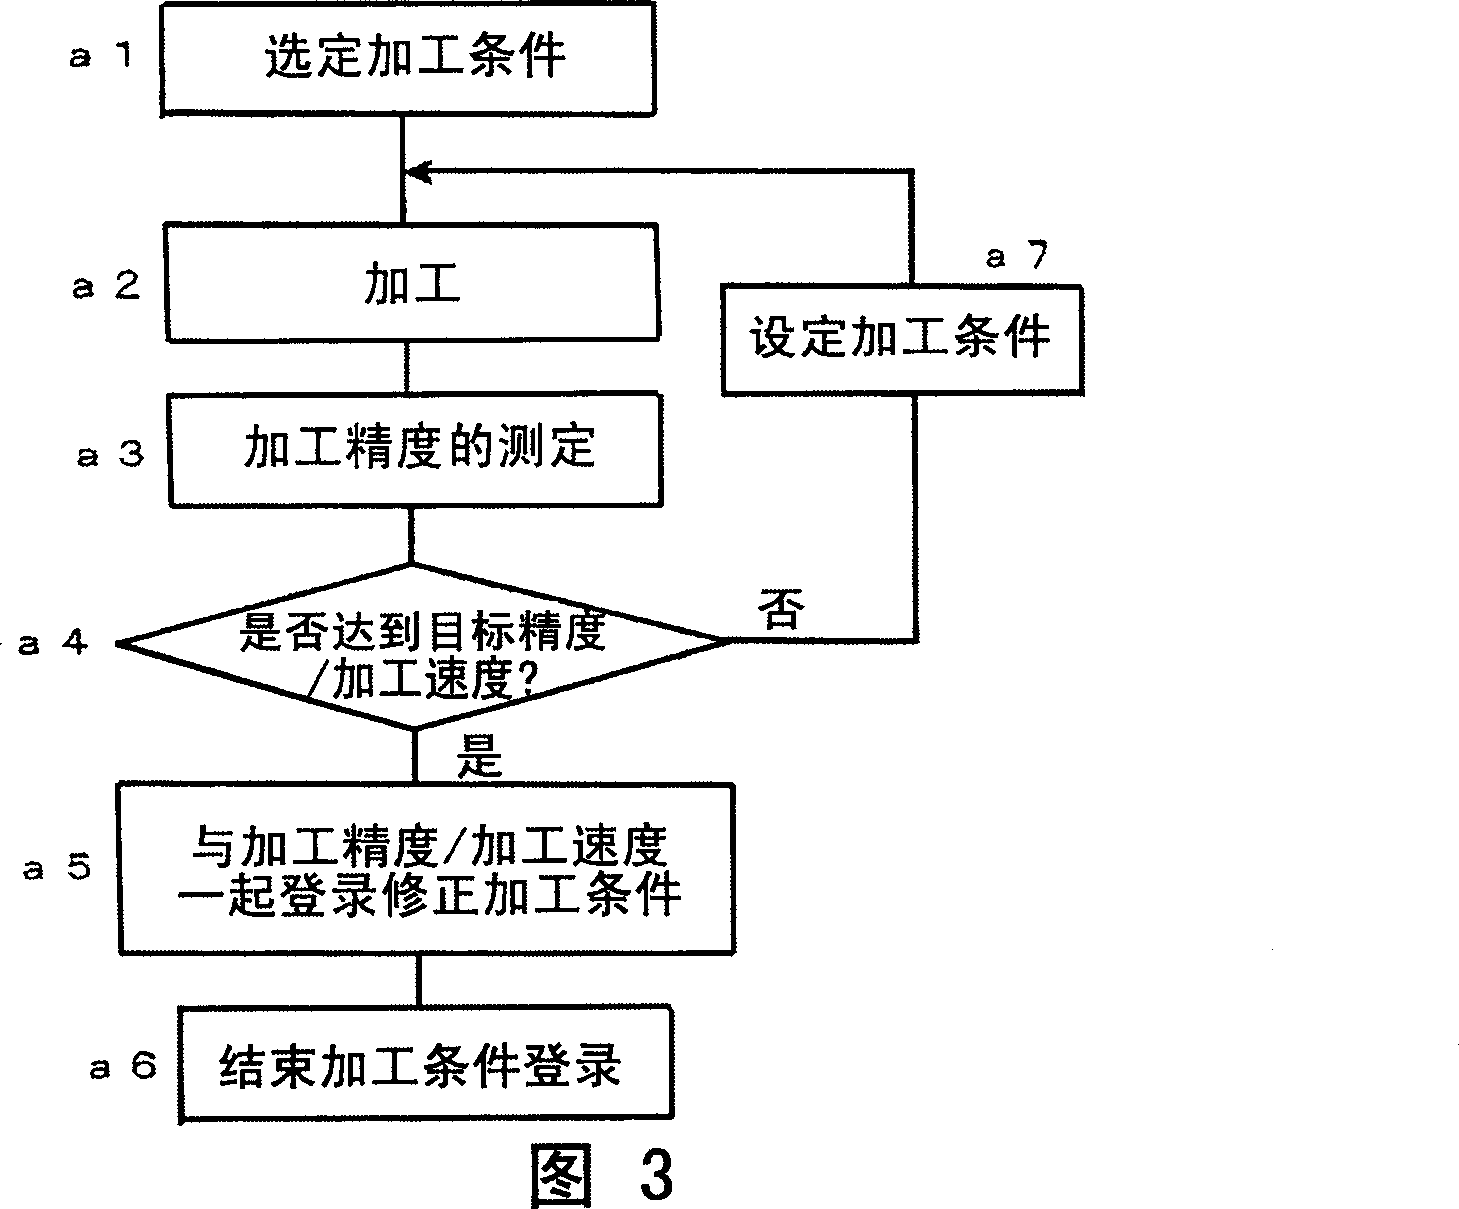 Machining condition setting method for electrical discharge machines